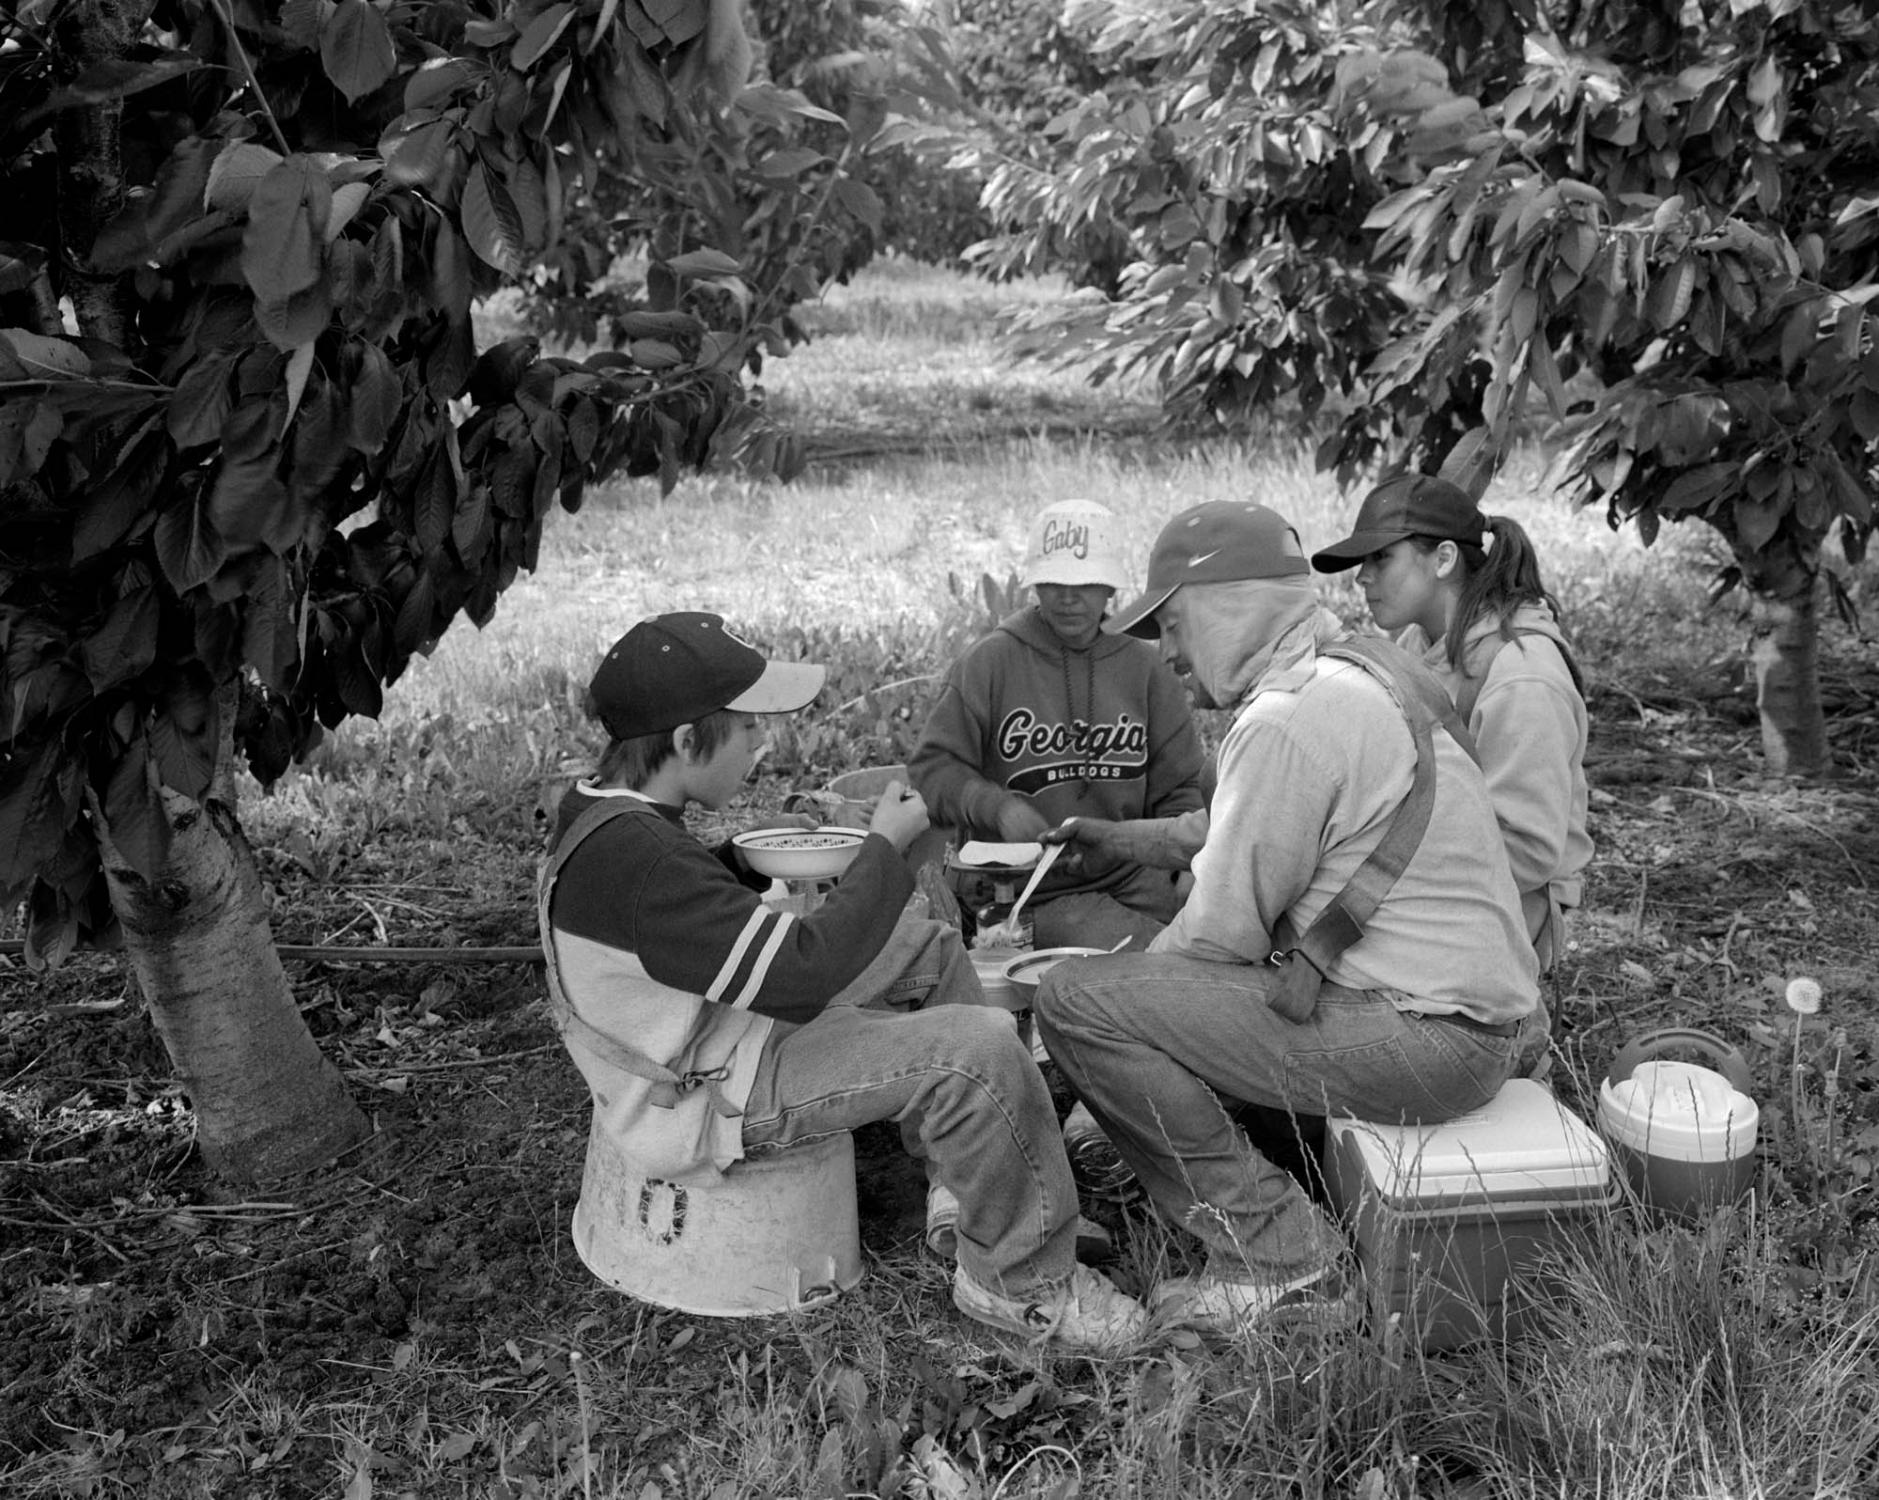 A Mexican family eats a meal of beans and tortillas that they heat on a gas burner, while seated under the cherry trees at Orchard View Farms, one of the biggest fruit growers in Oregon. The father, mother and their teenage son and daughter all wear American clothing that covers up their body. A lot of pesticides are used in the cherry cultivation. That is why the rules say that everybody should cover up their skin and mouth while working, but not all do so. The minimum age for a hand-picker in Oregon is 16 years. Most of this manual labor is done by young Latinos. The harvest starts early every morning at the crack of dawn and stops around 11 AM, when it gets too warm and the chance of damaging the fruit increases. The Dalles, Oregon, USA. July 2005. From the photo story The Farmworkers&#39; Children. 